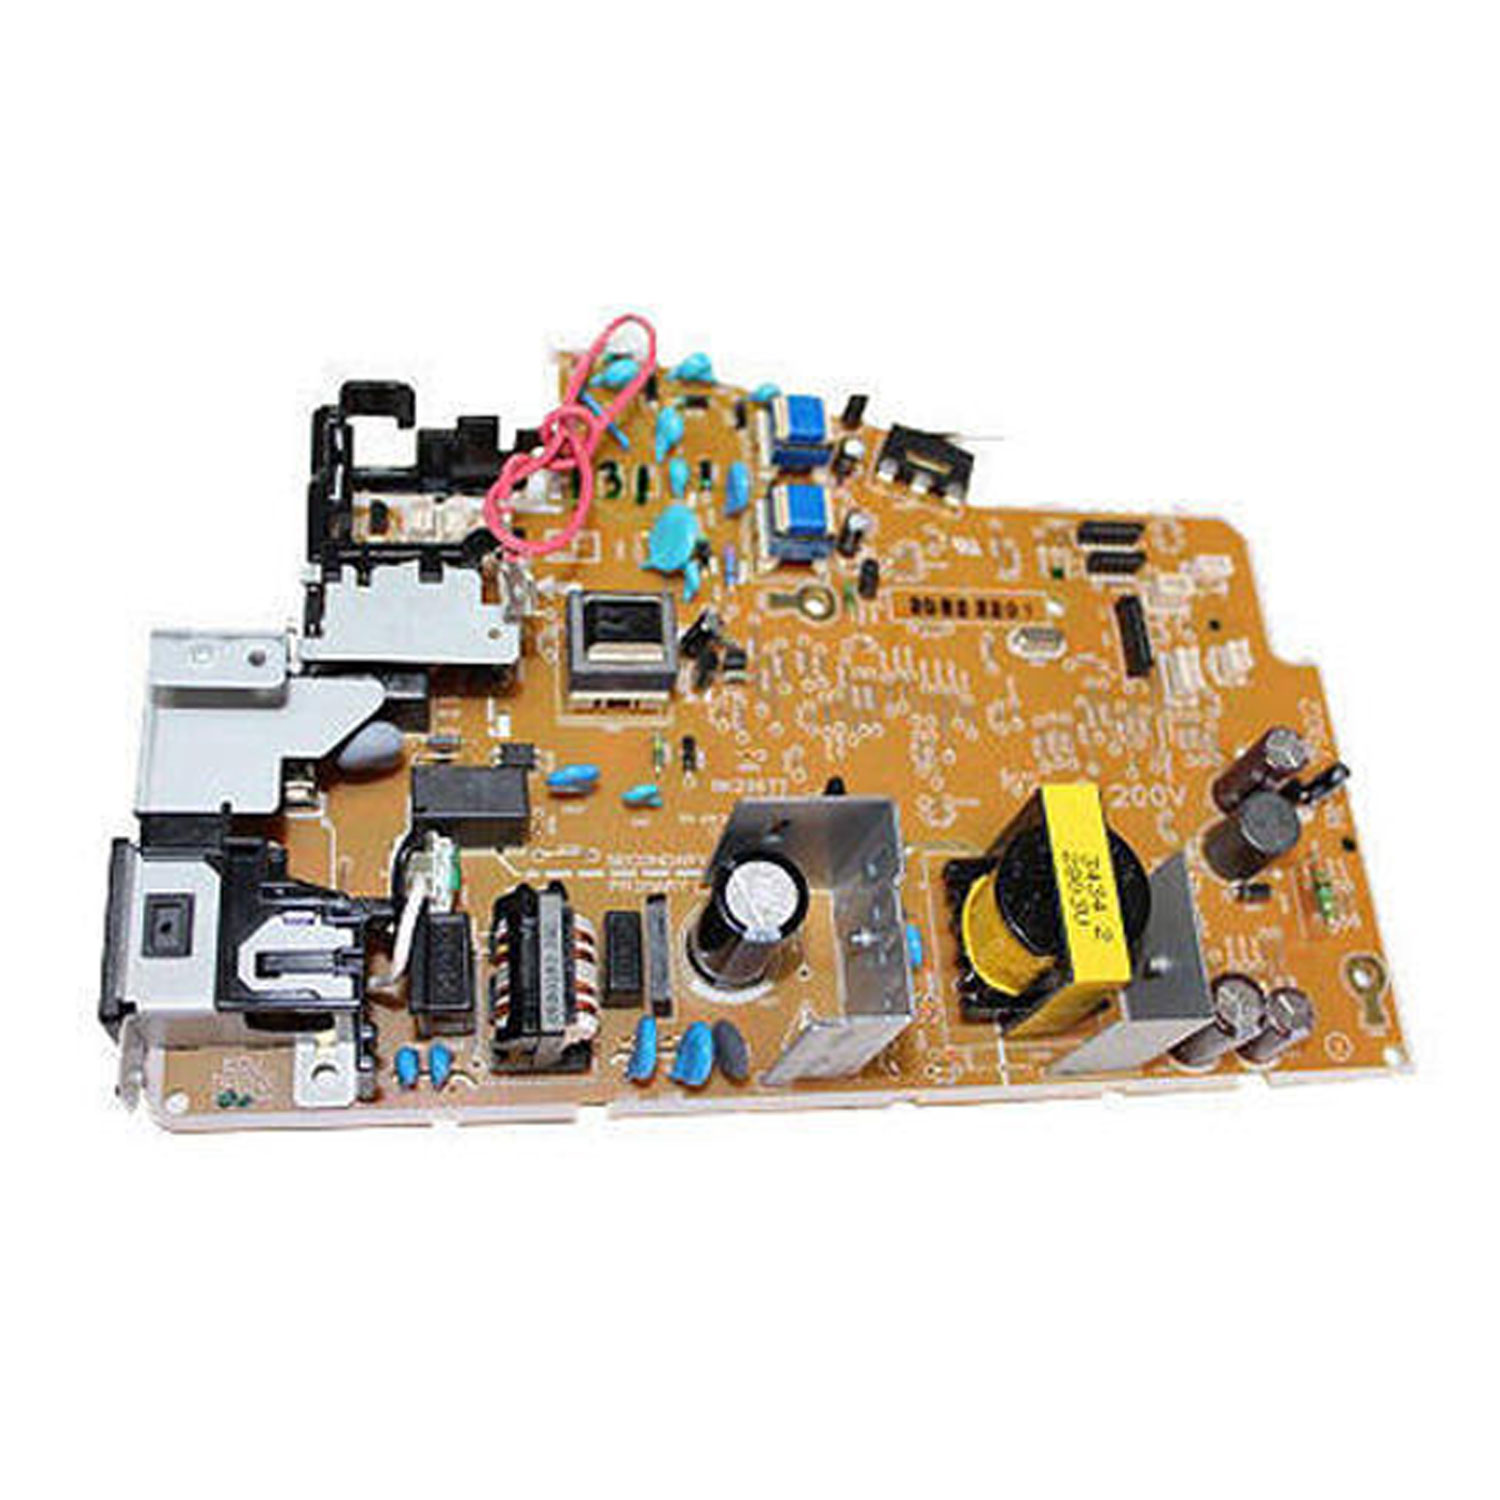 Hp 1213 POWER SUPPLY  for HP 1213 PRINTER